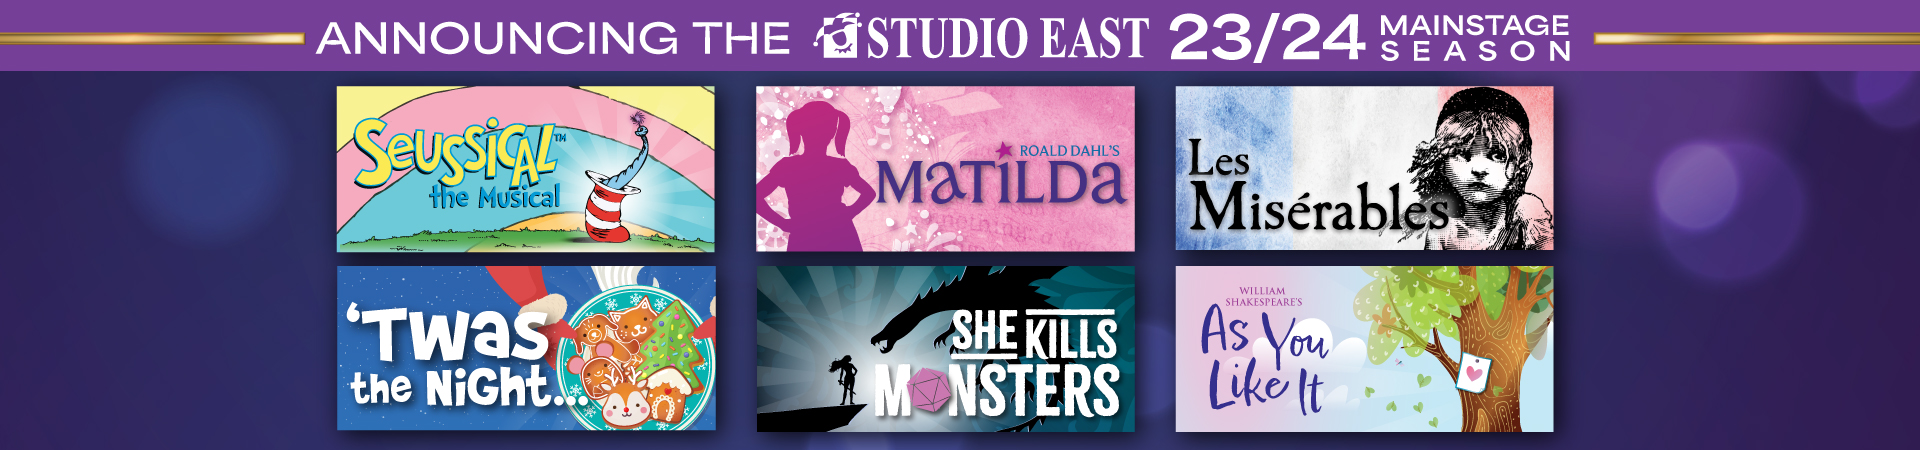 A series of four shows are featured in the studio east.